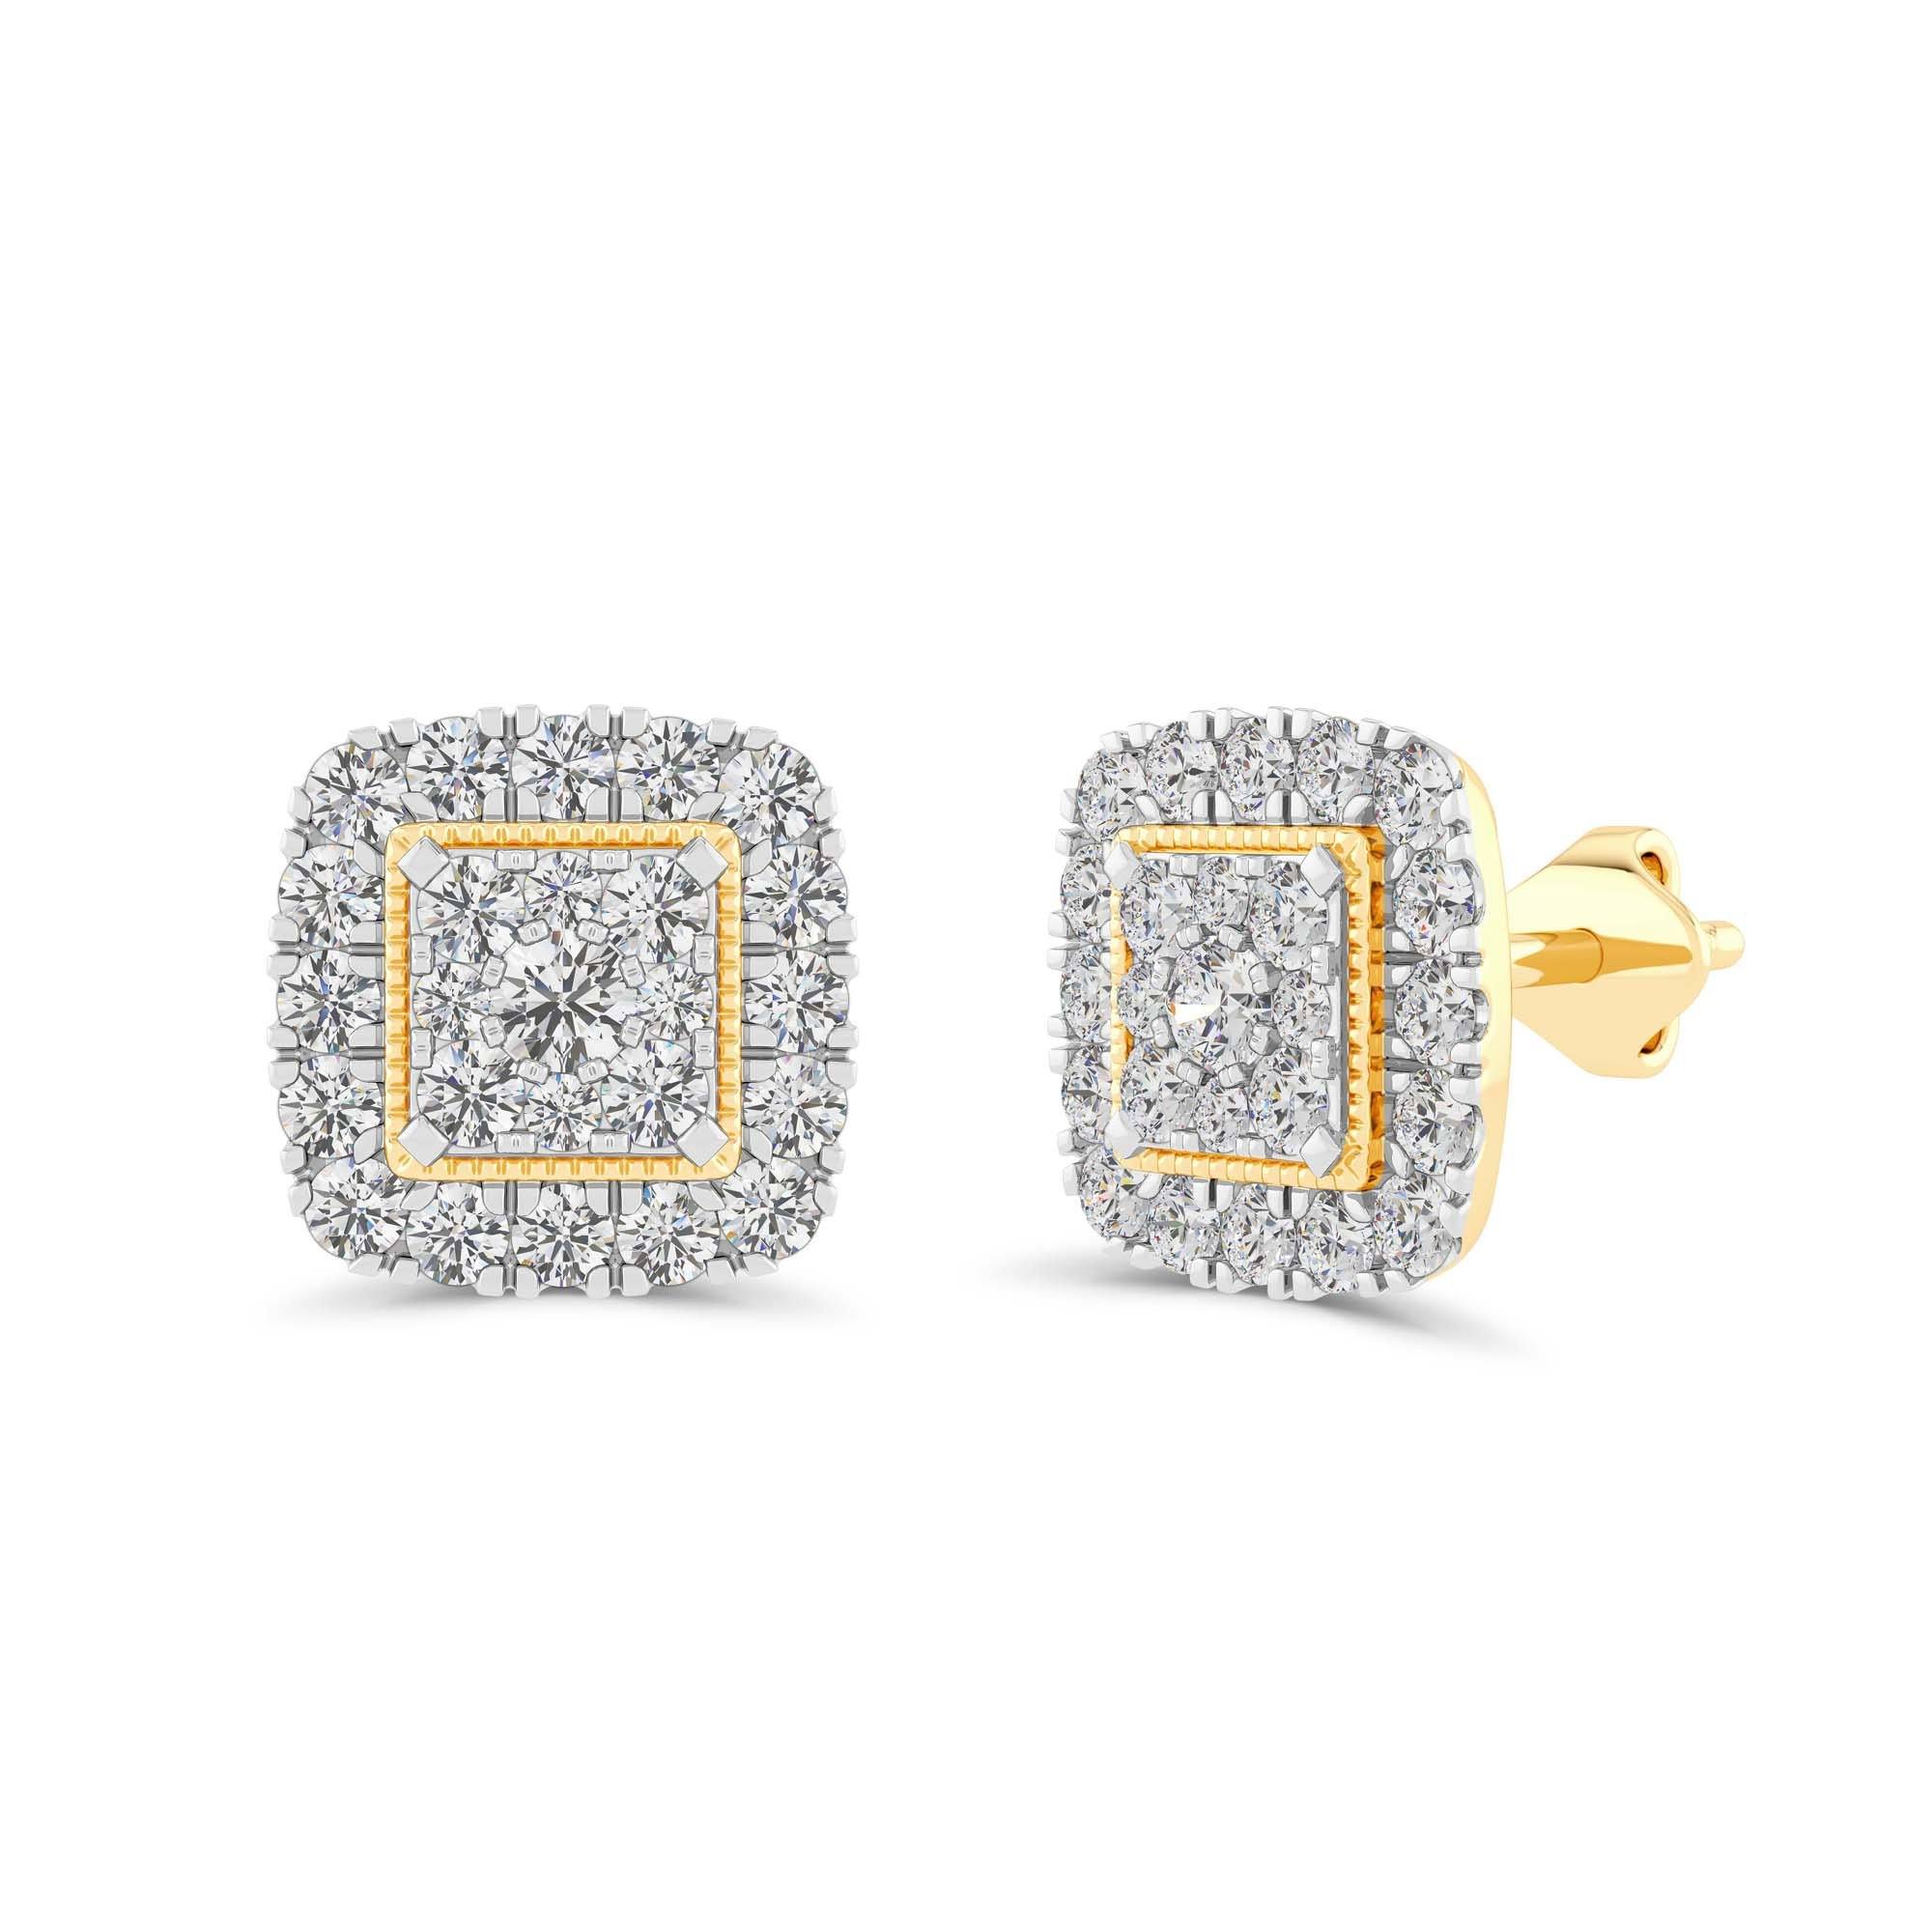 Sqaure Look Earrings with 3/4ct of Diamonds in 9ct Yellow Gold Earrings Bevilles 